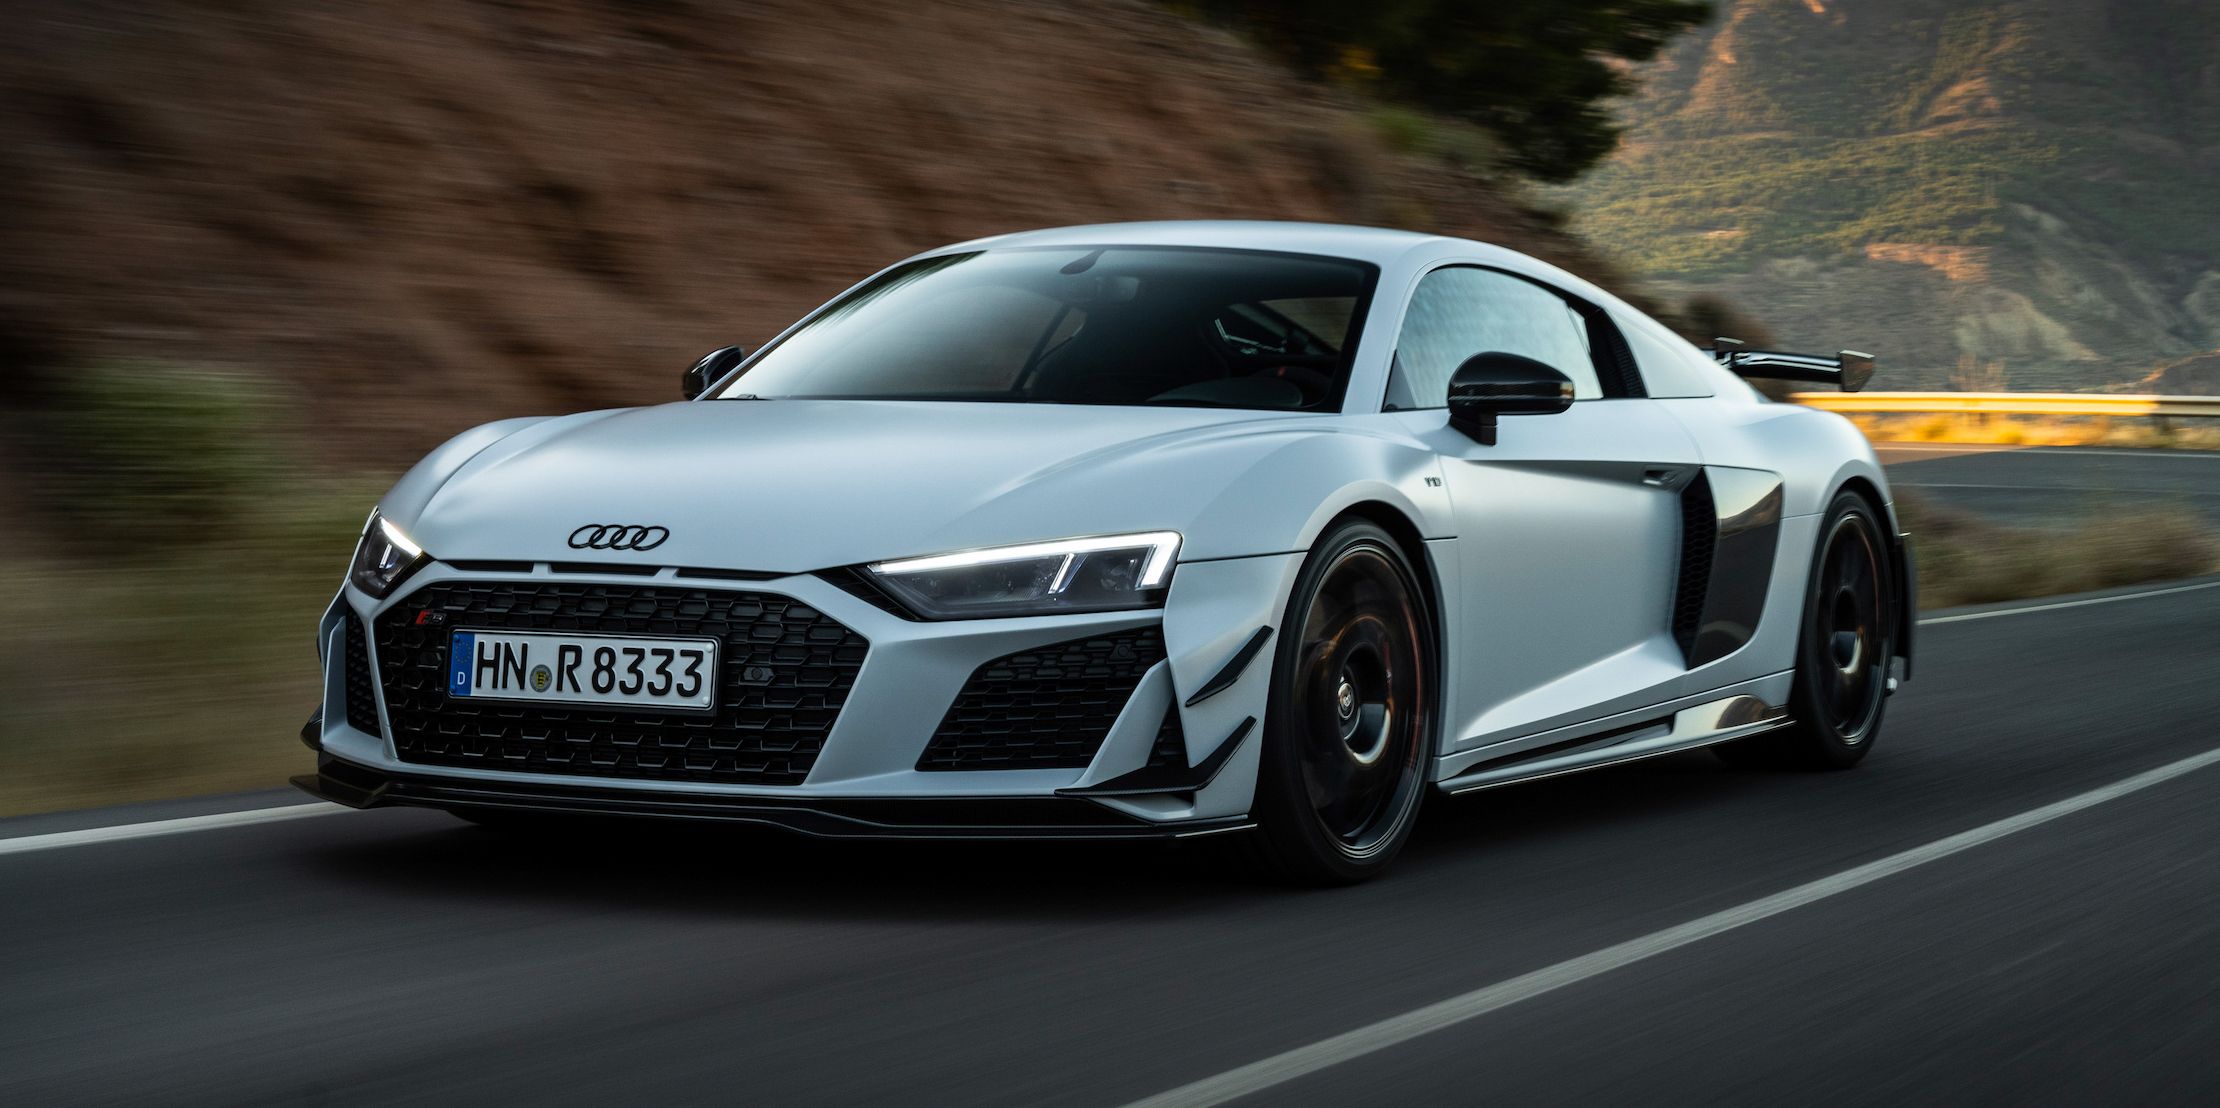 Audi Says Goodbye to the R8 With a 602-HP Rear-Drive GT